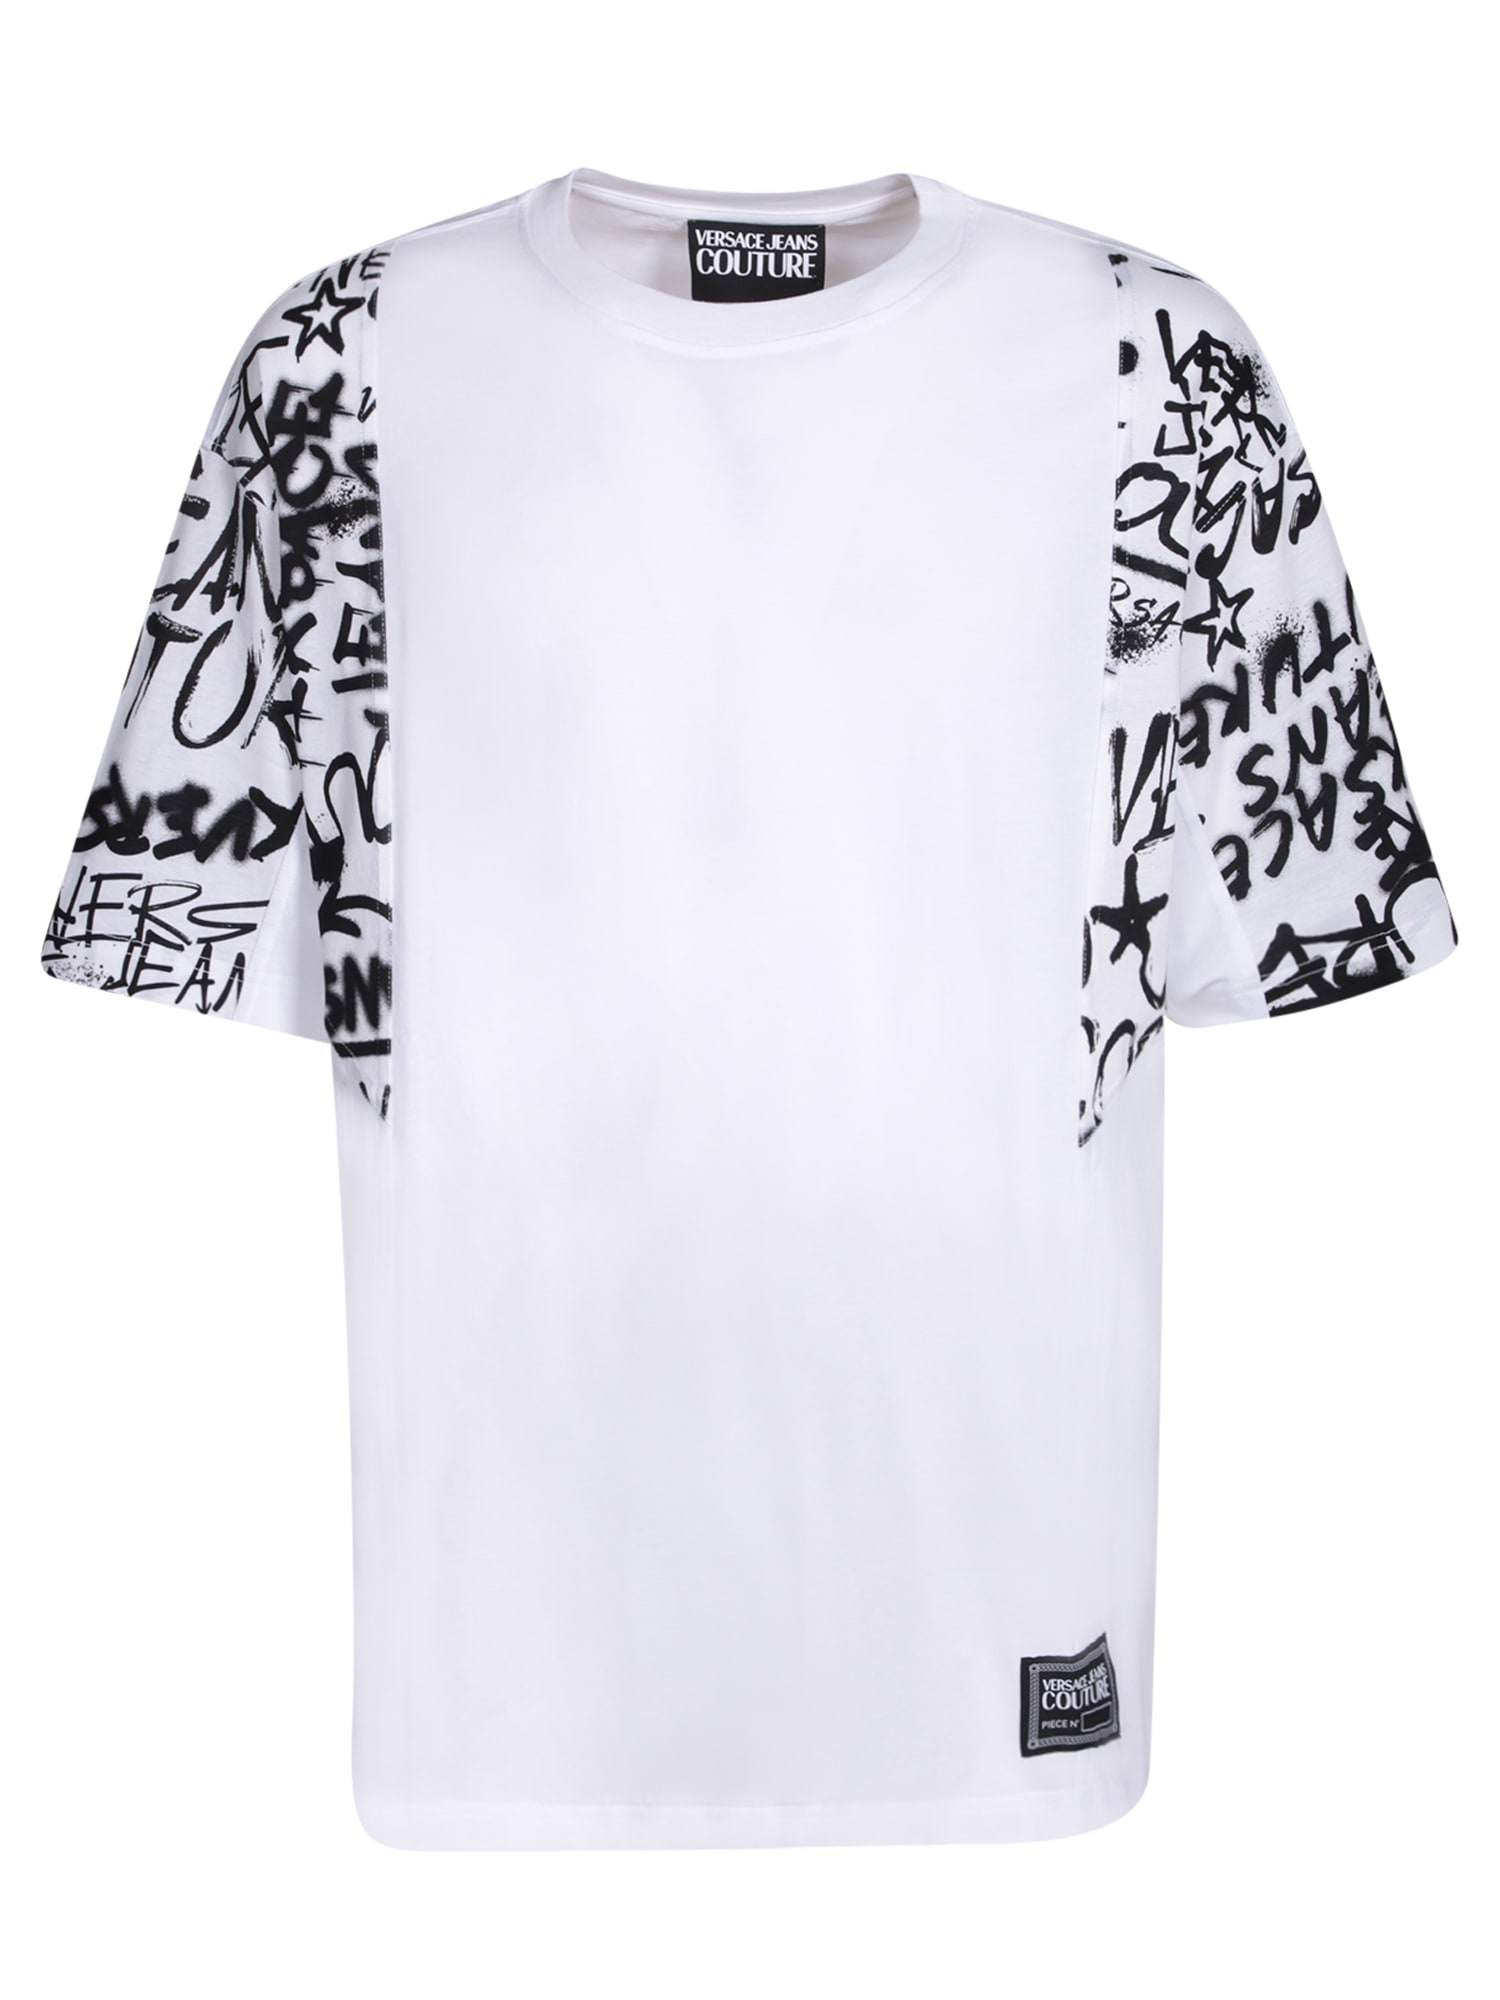 Graffiti Print White T-shirt By Versace Jeans Couture